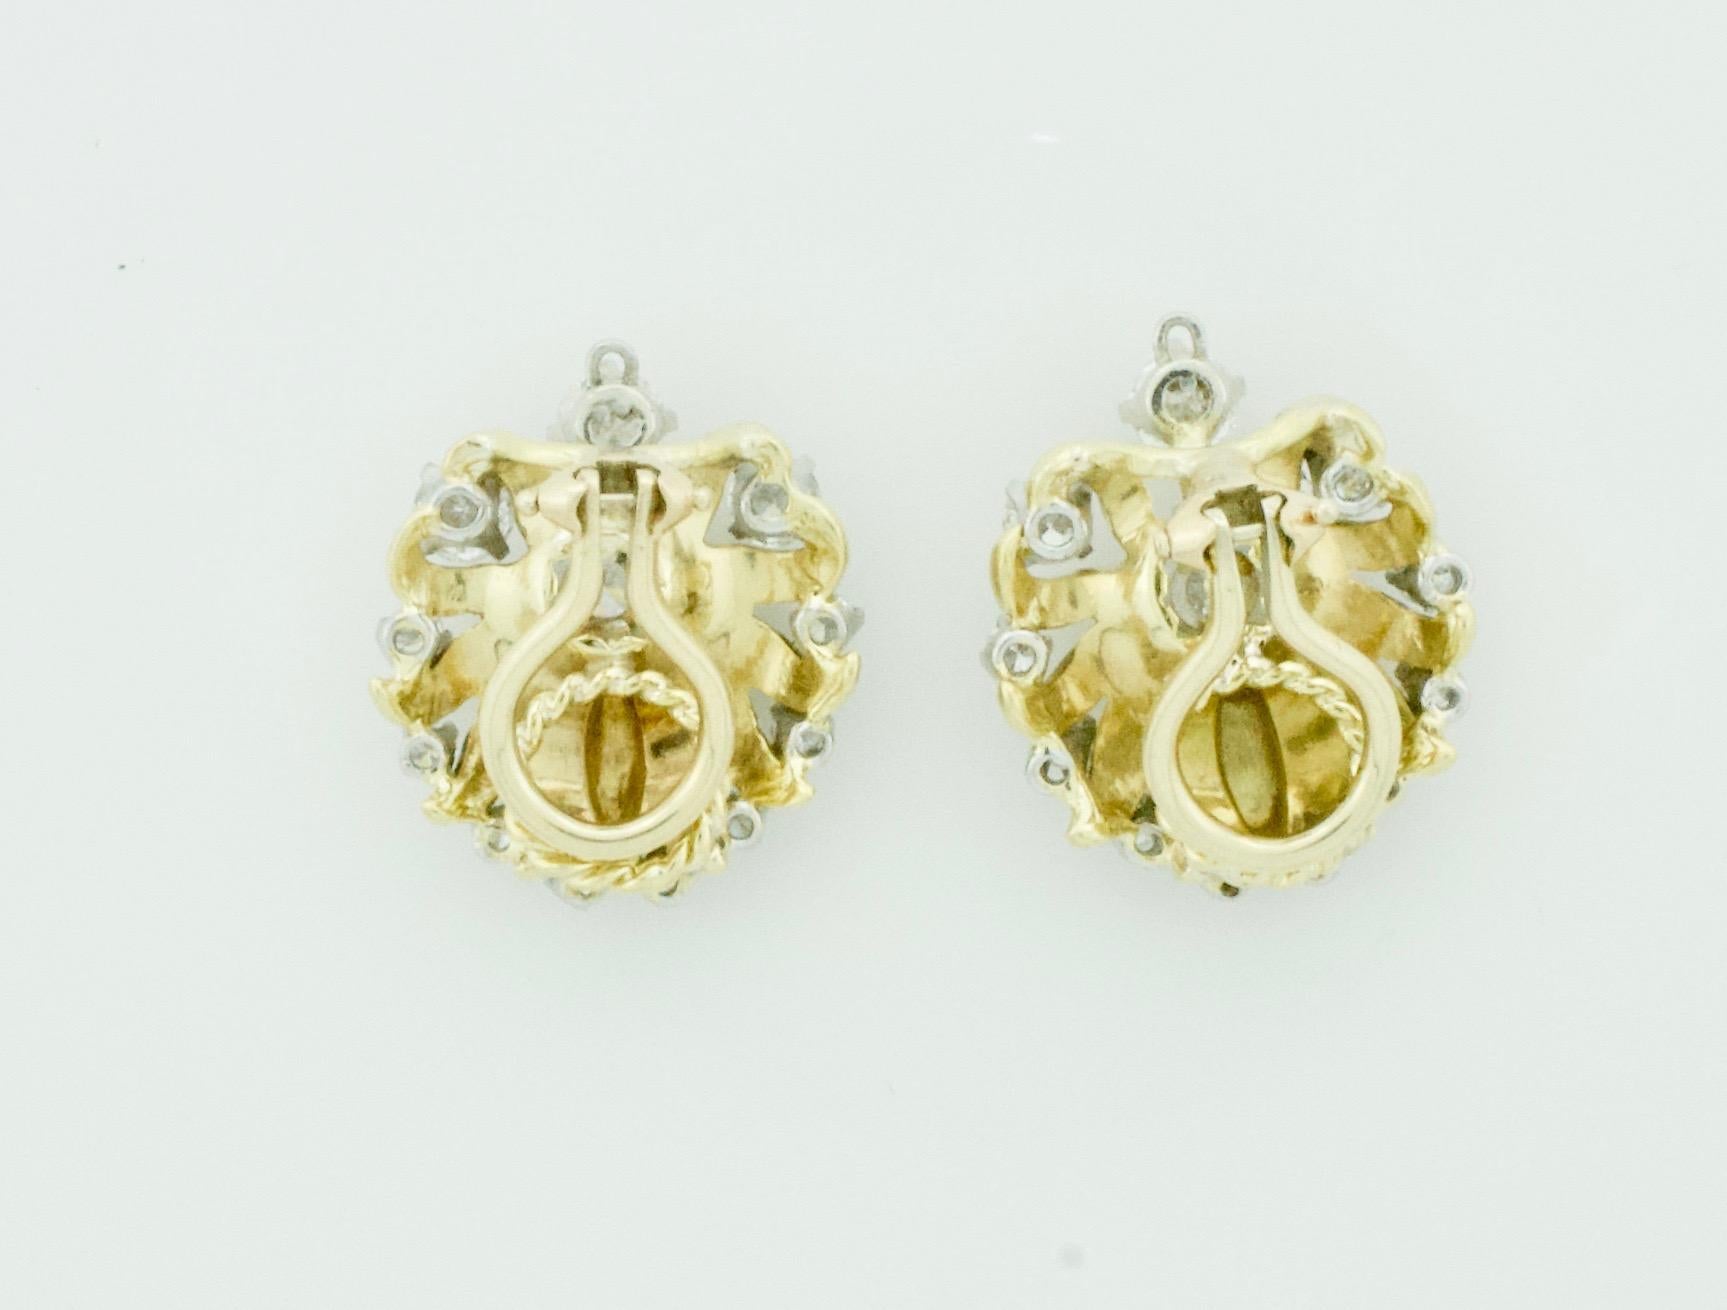 Delightful 18k Yellow and White Gold Earrings, Circa 1950's In Excellent Condition For Sale In Wailea, HI